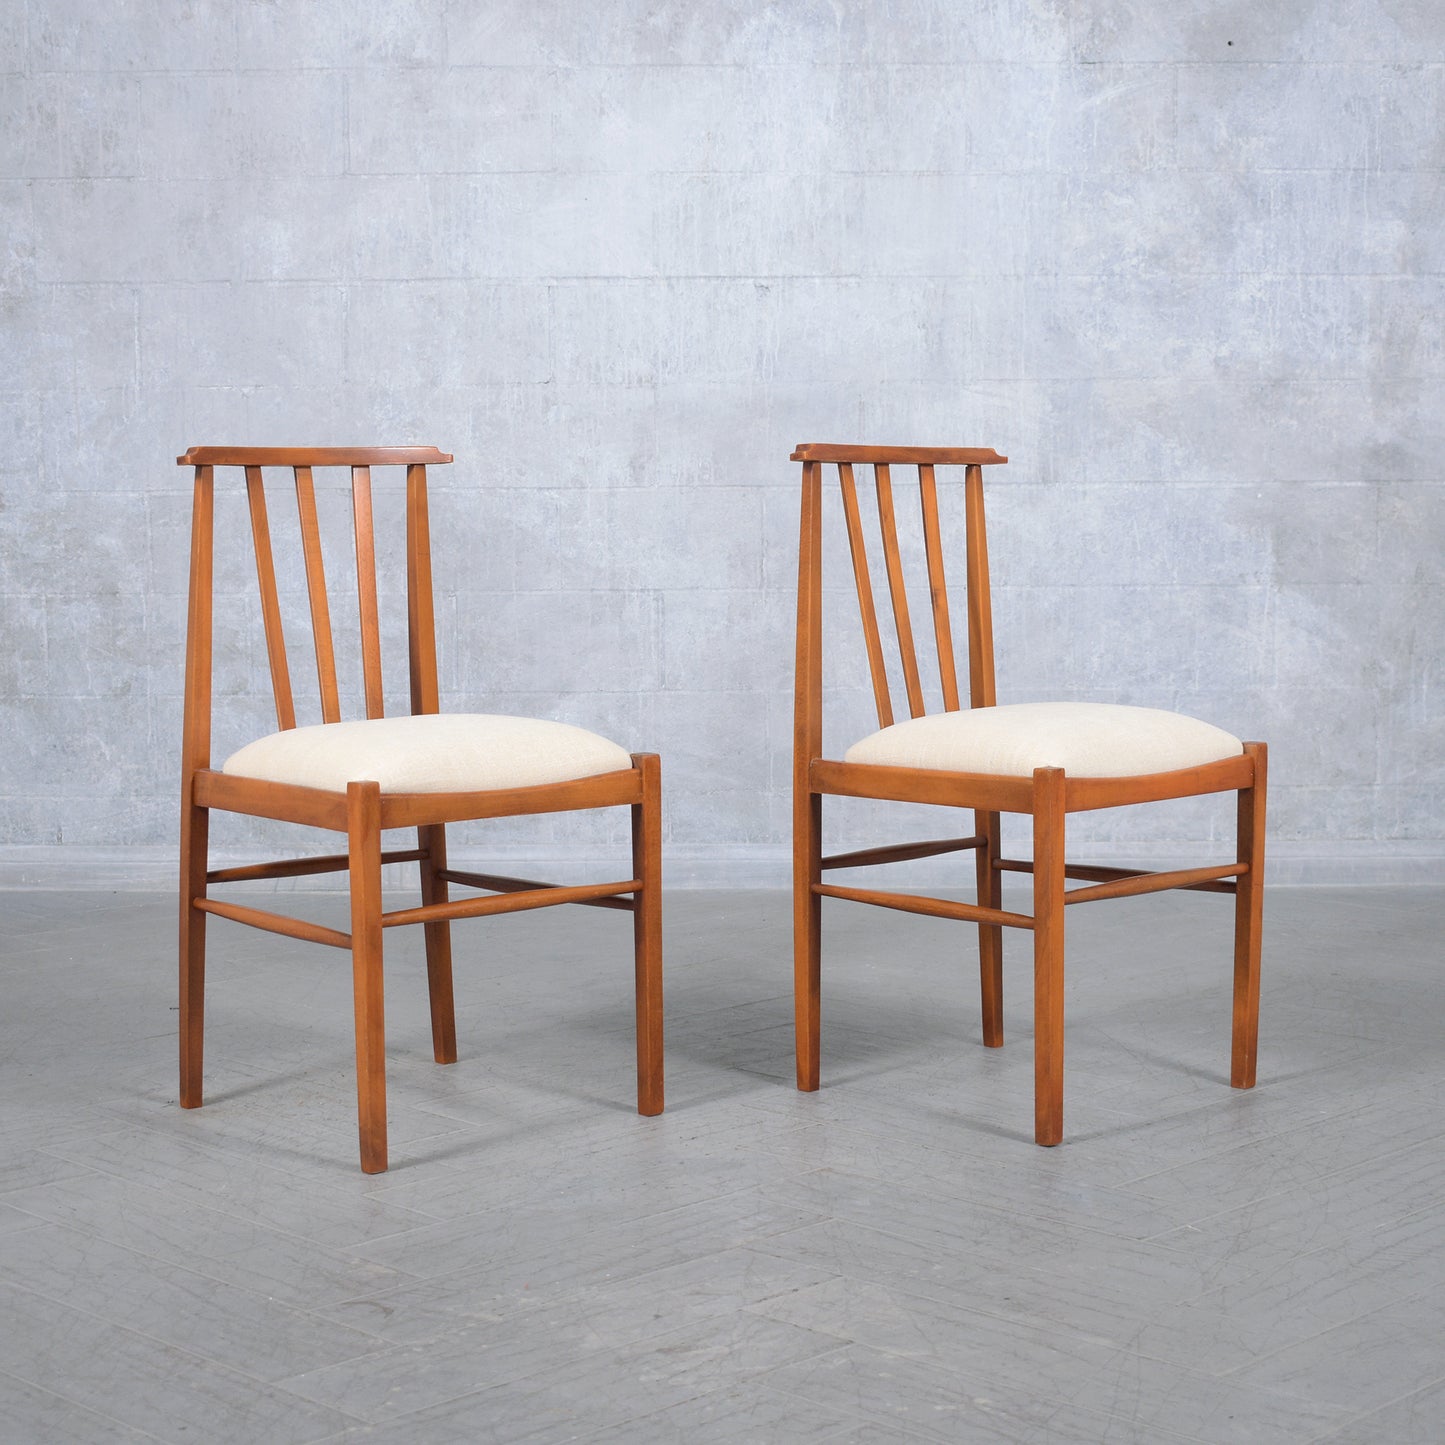 Eight 1960s Hand-Crafted Solid Maple Wood Mid Century Modern Dining Chairs